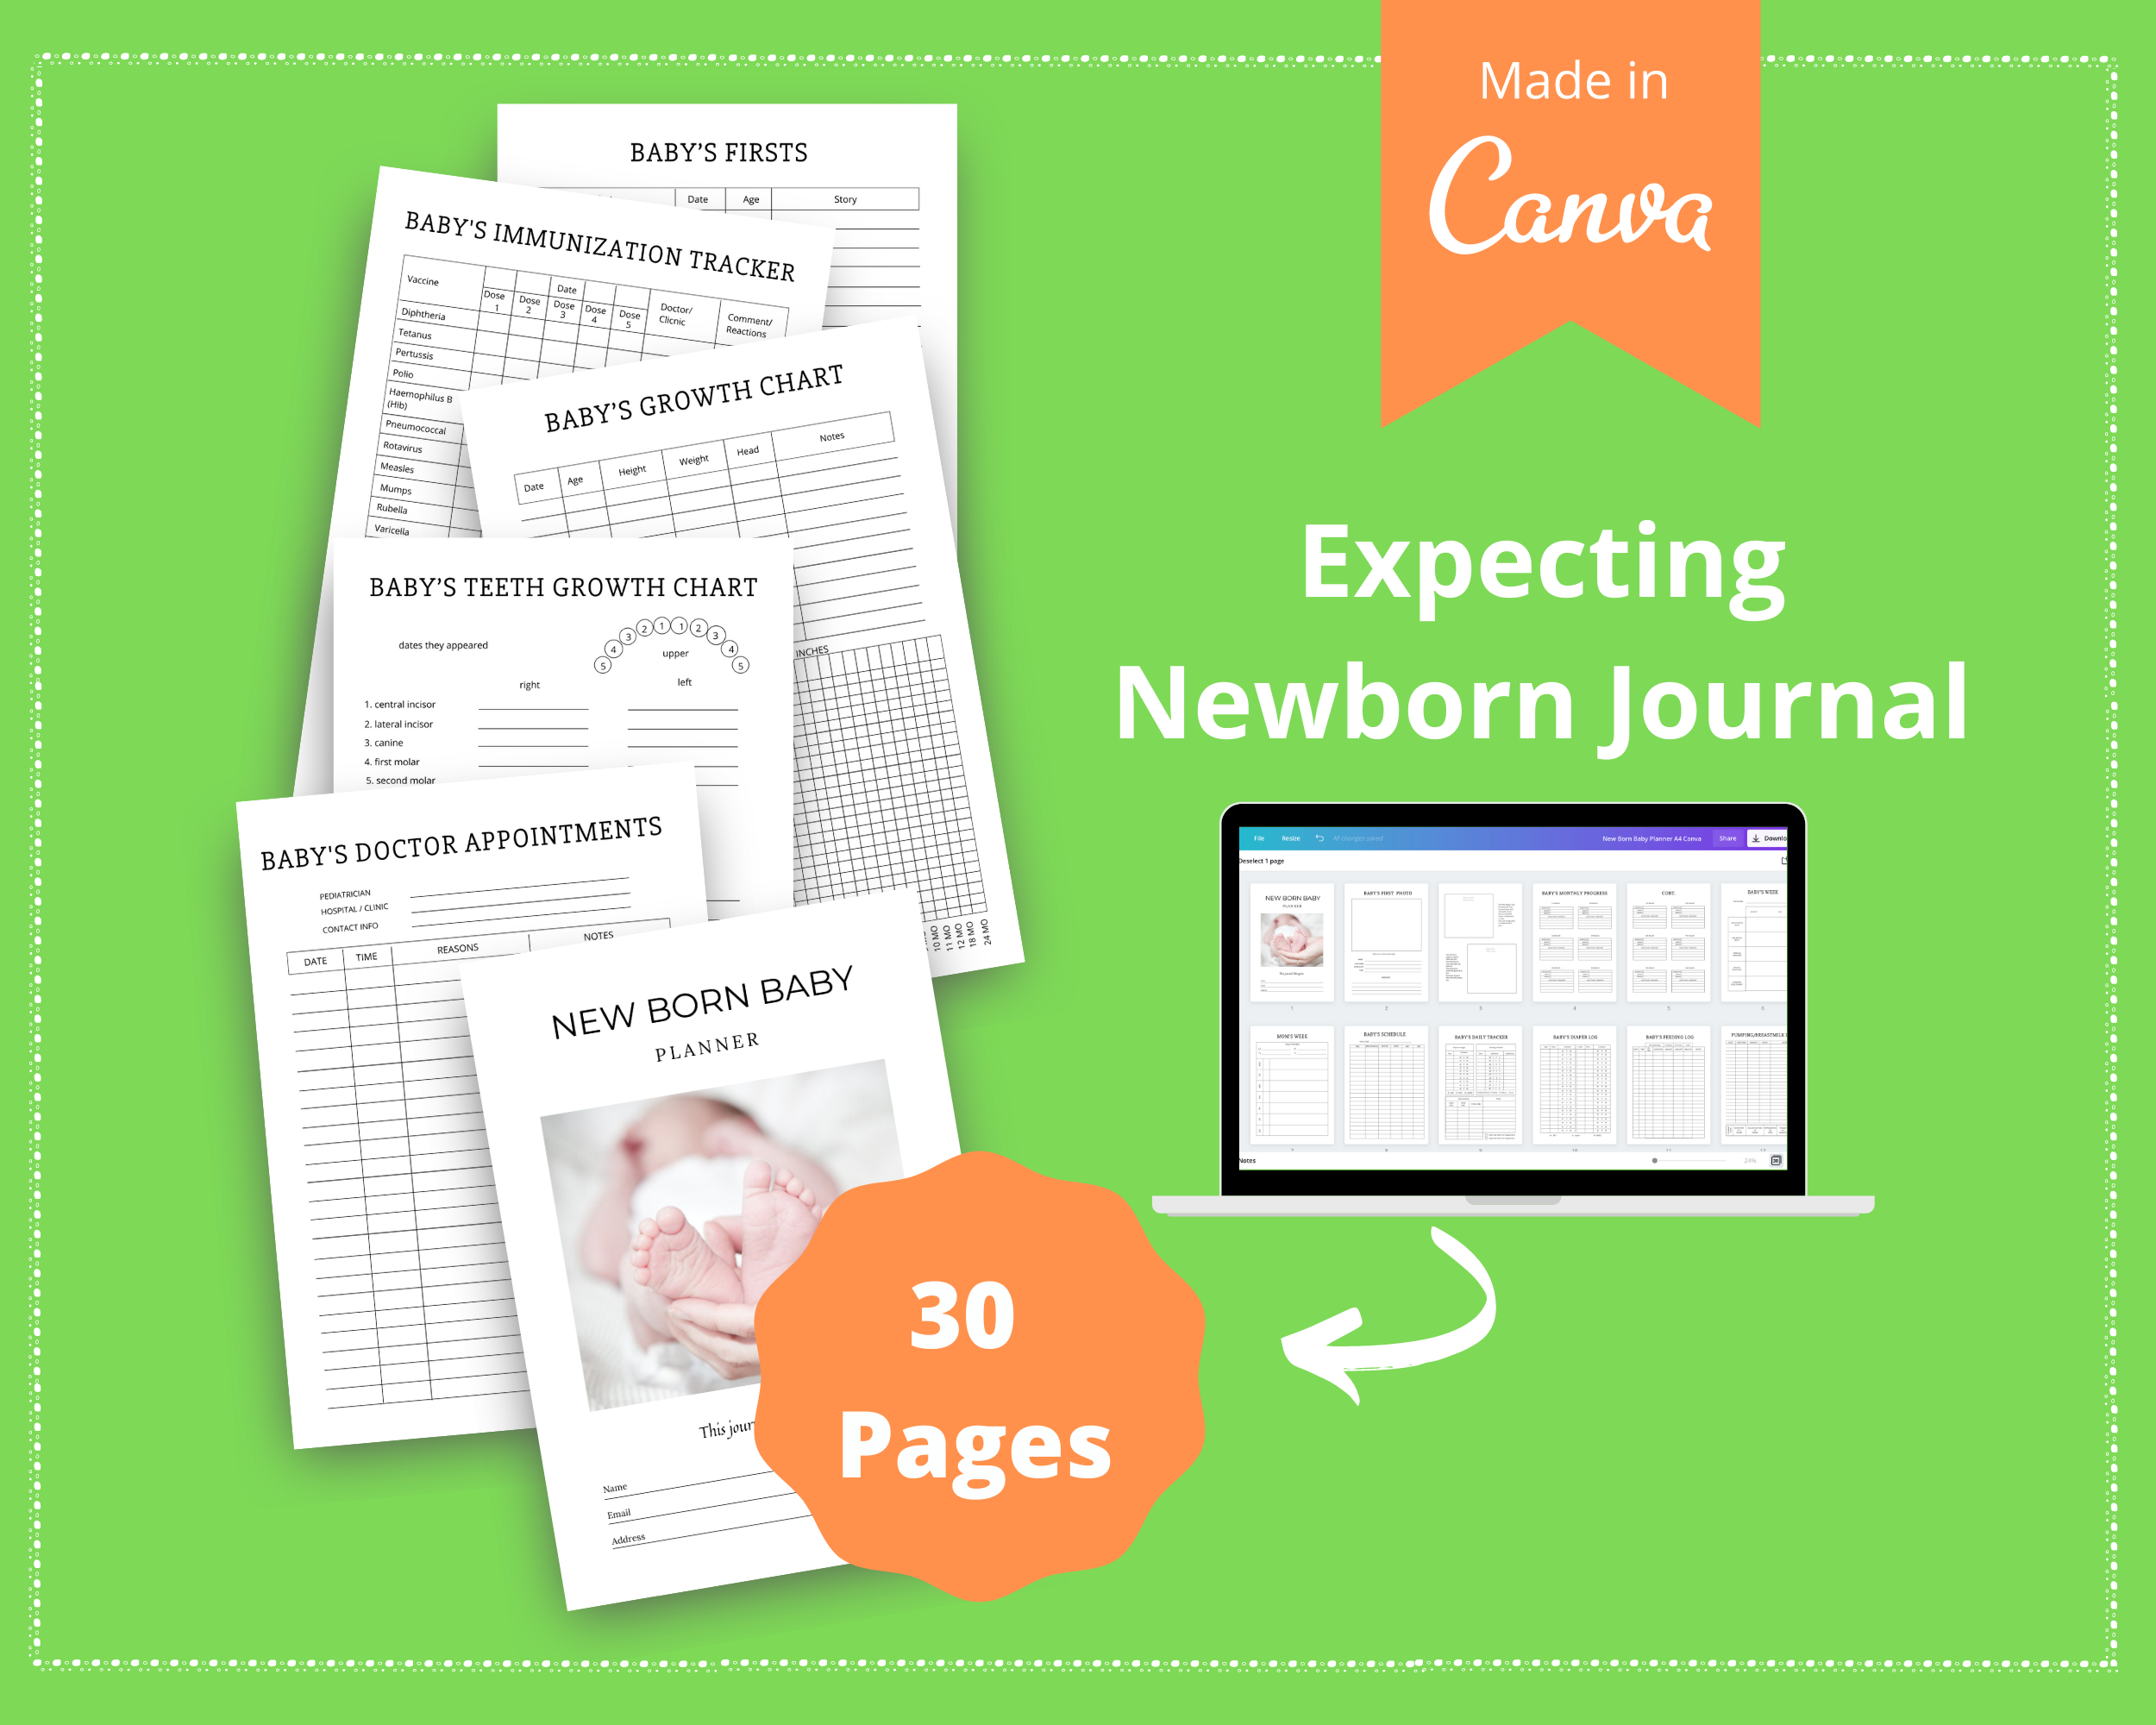 Editable New Born Baby Planner Templates in Canva | Commercial Use